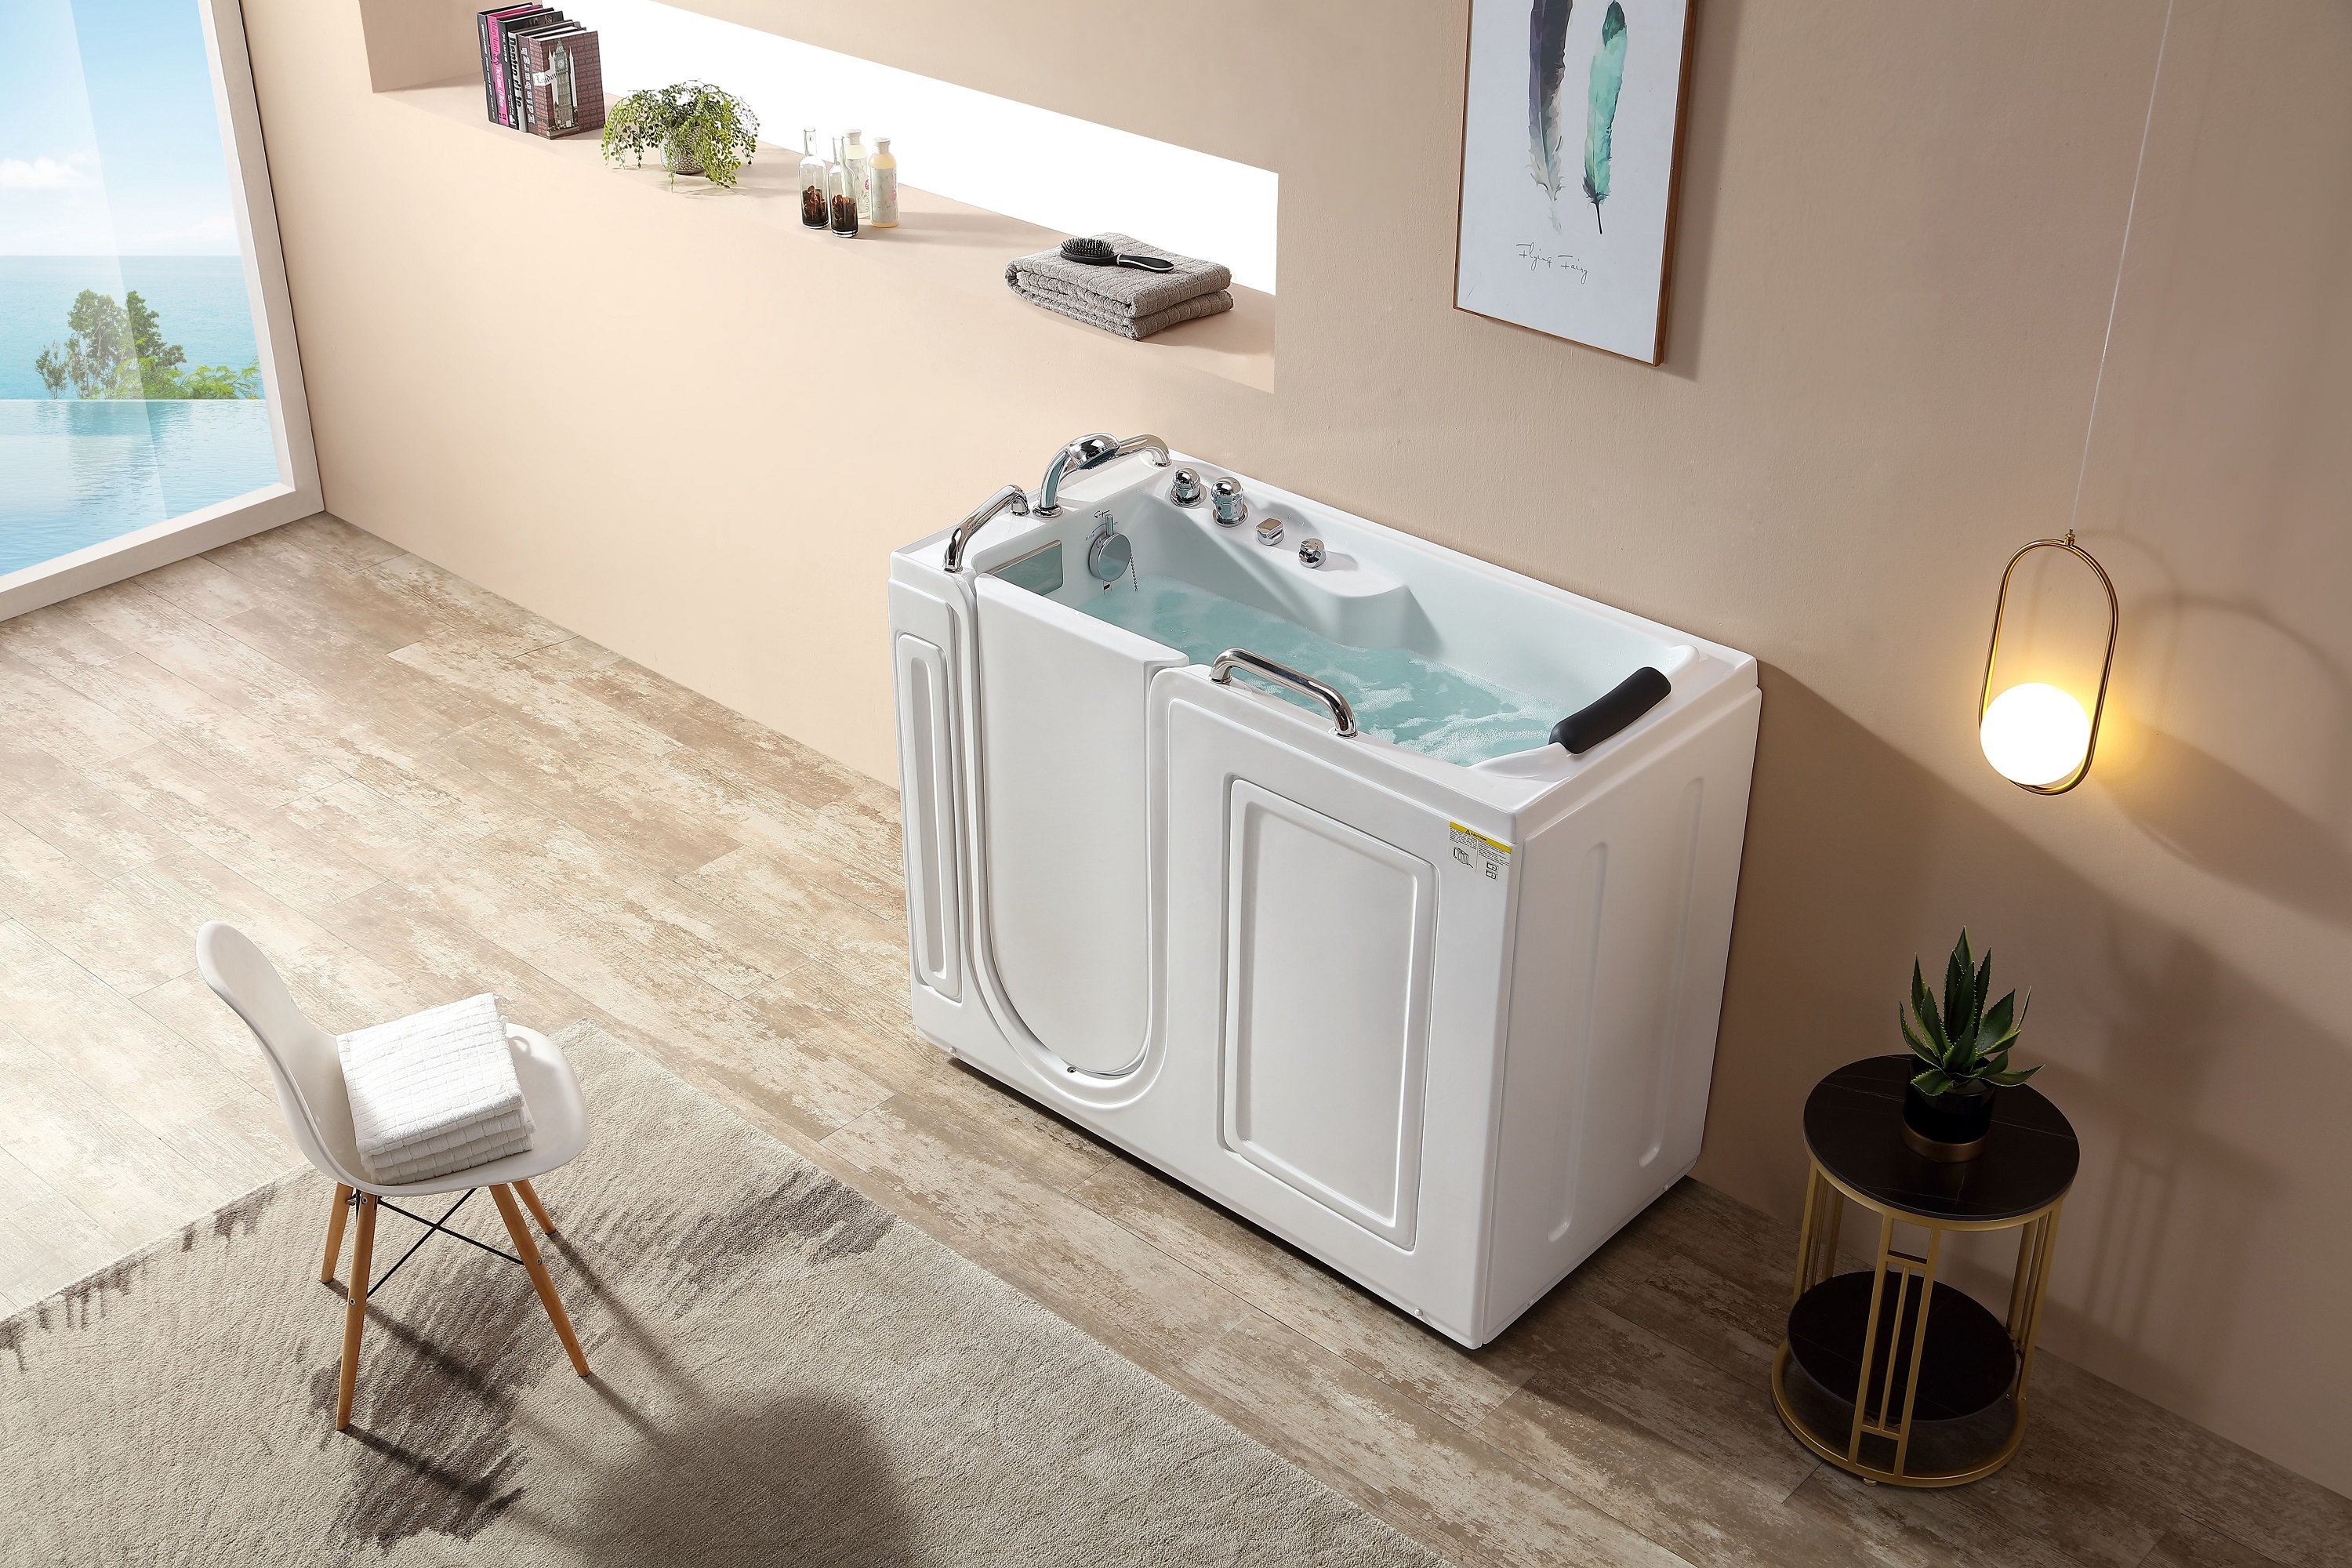 EMPAVA introduces the new 53-inch Walk-in Whirlpool Bathtub, with a spacious interior and larger than average door for maximum comfort.